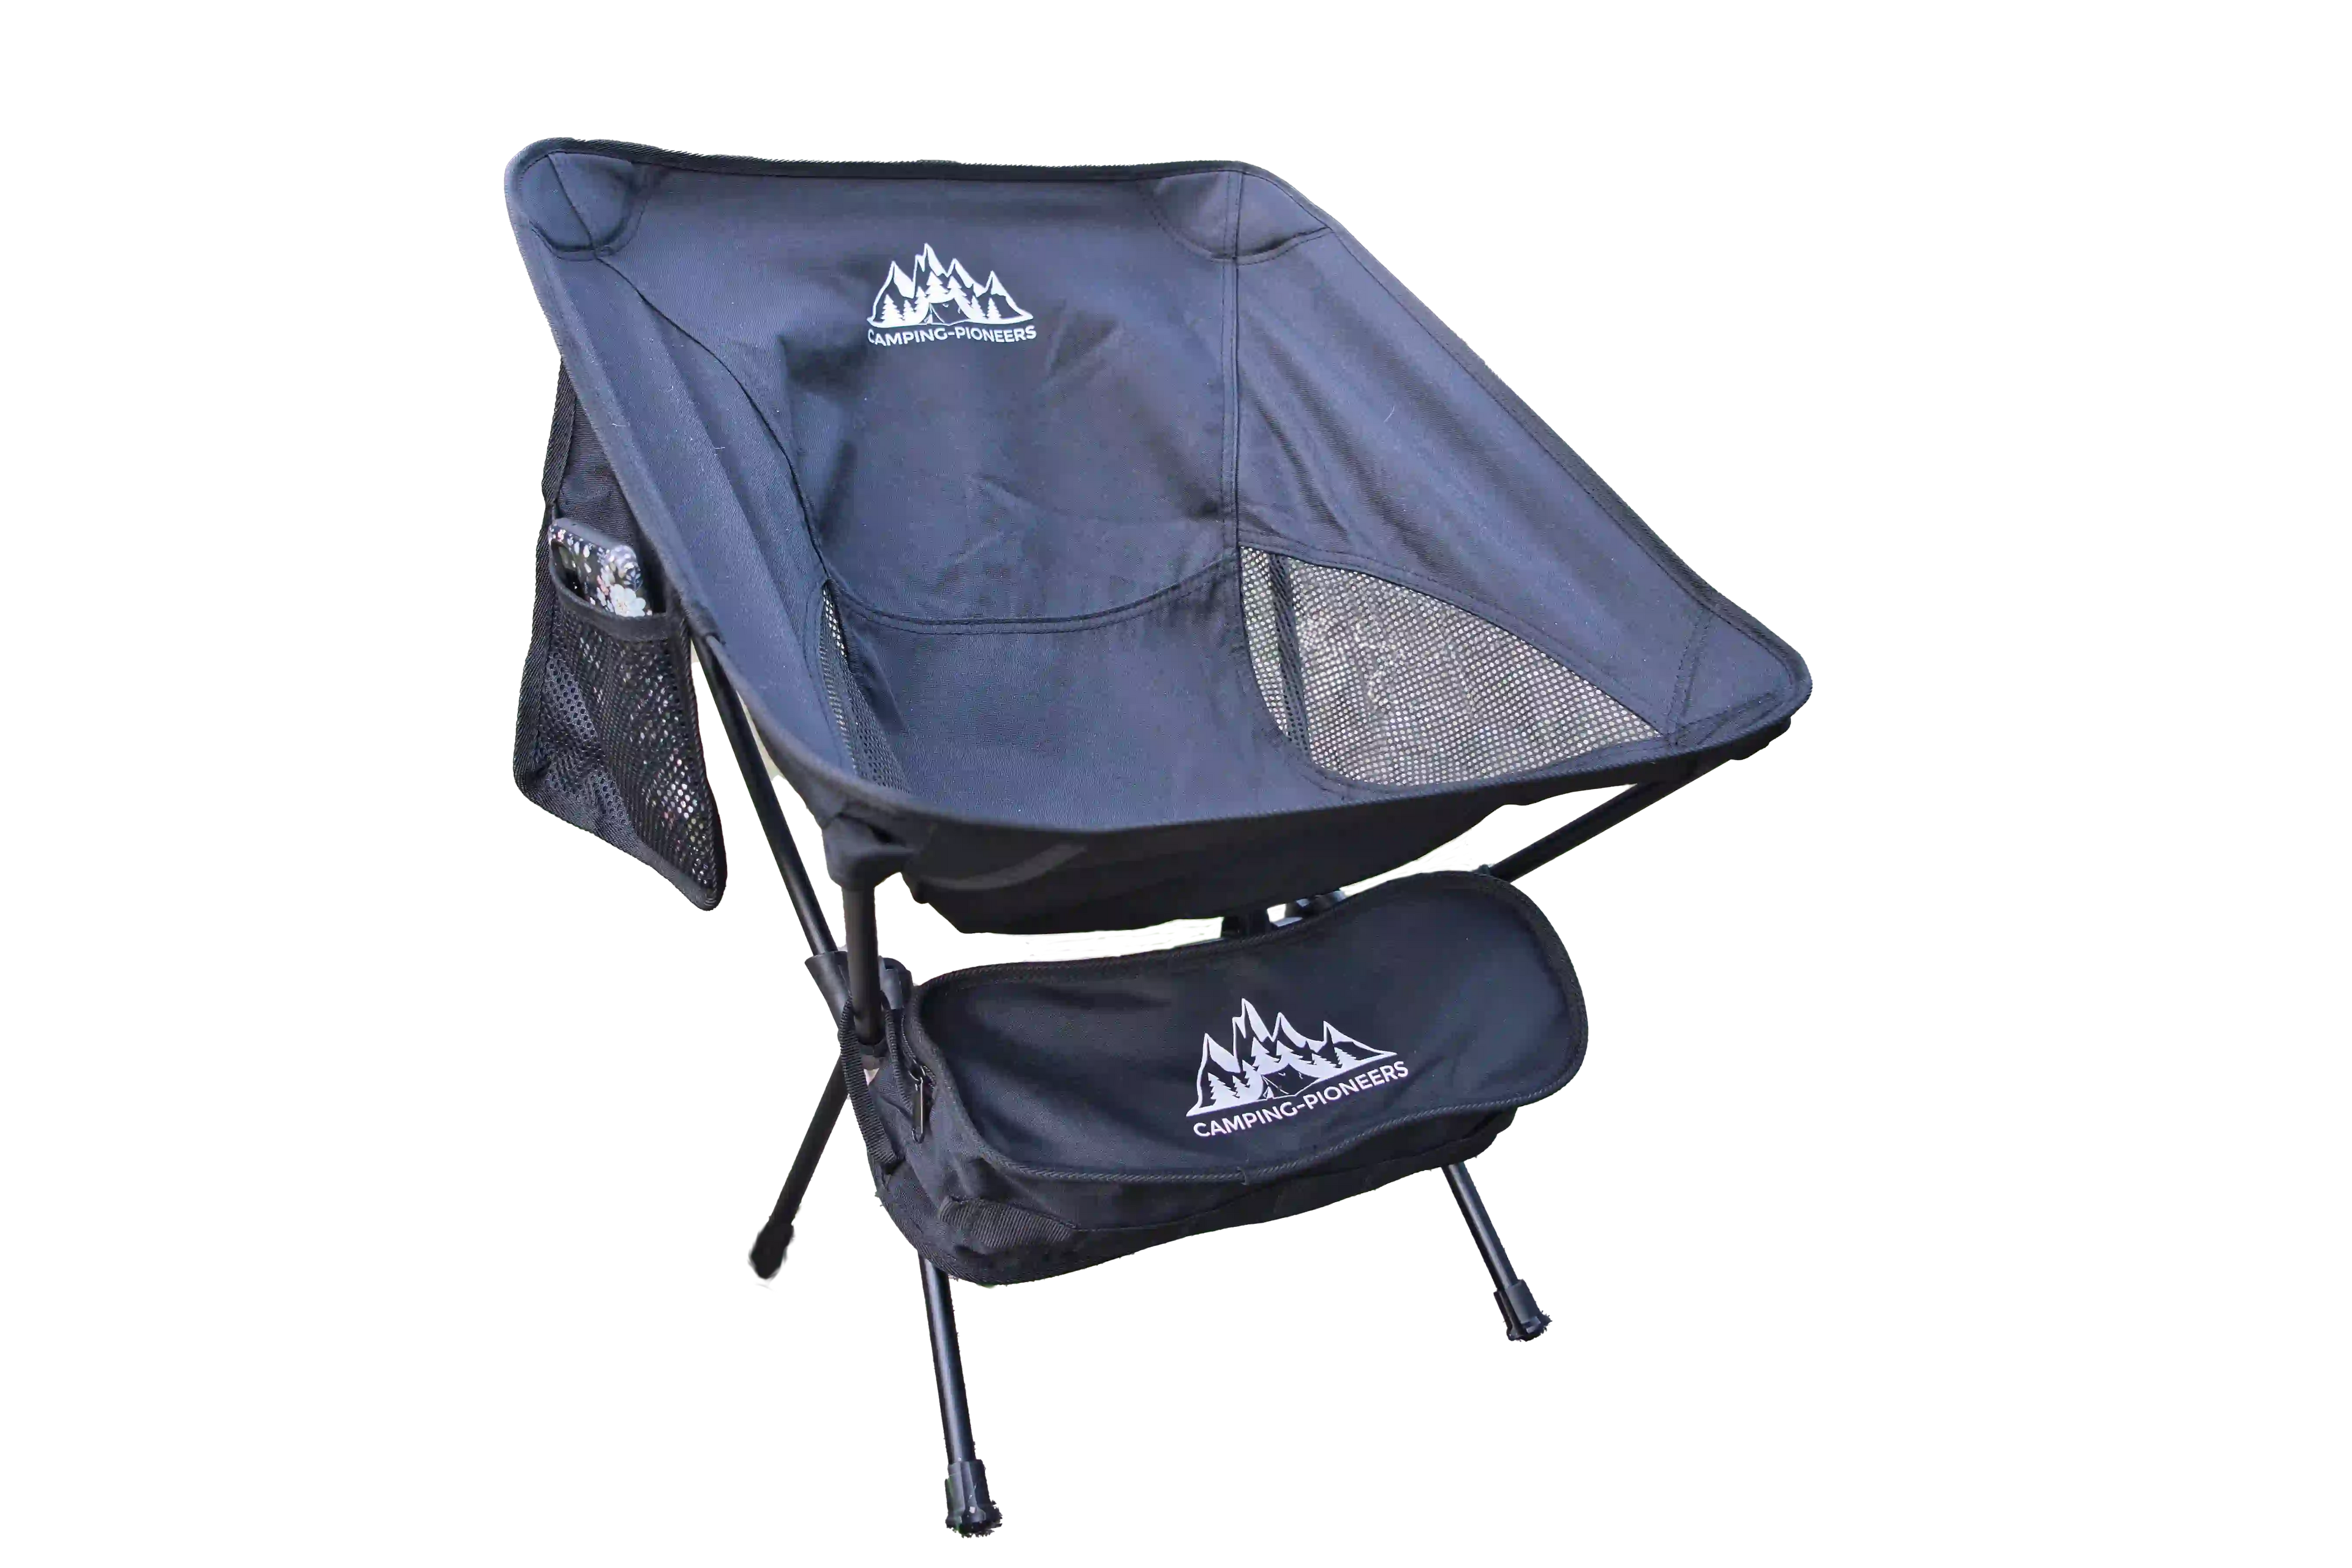 Original Pioneers COMPACT chair - lightweight, small pack size, quick to set up - camping chair